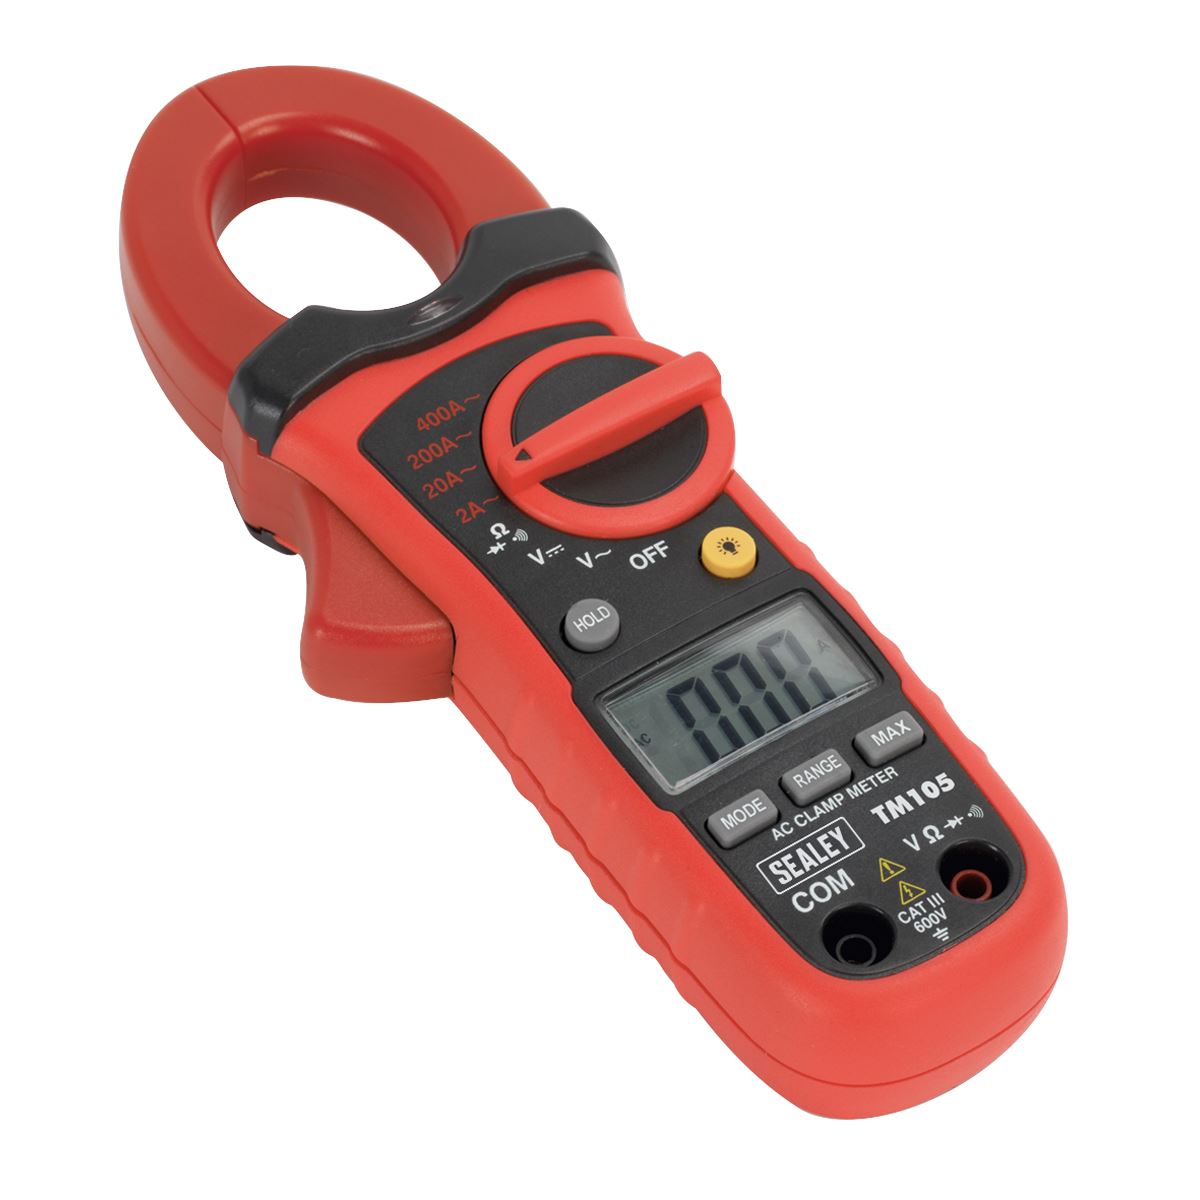 Sealey Professional Auto-Ranging Digital Clamp Meter NCVD - 6-Function